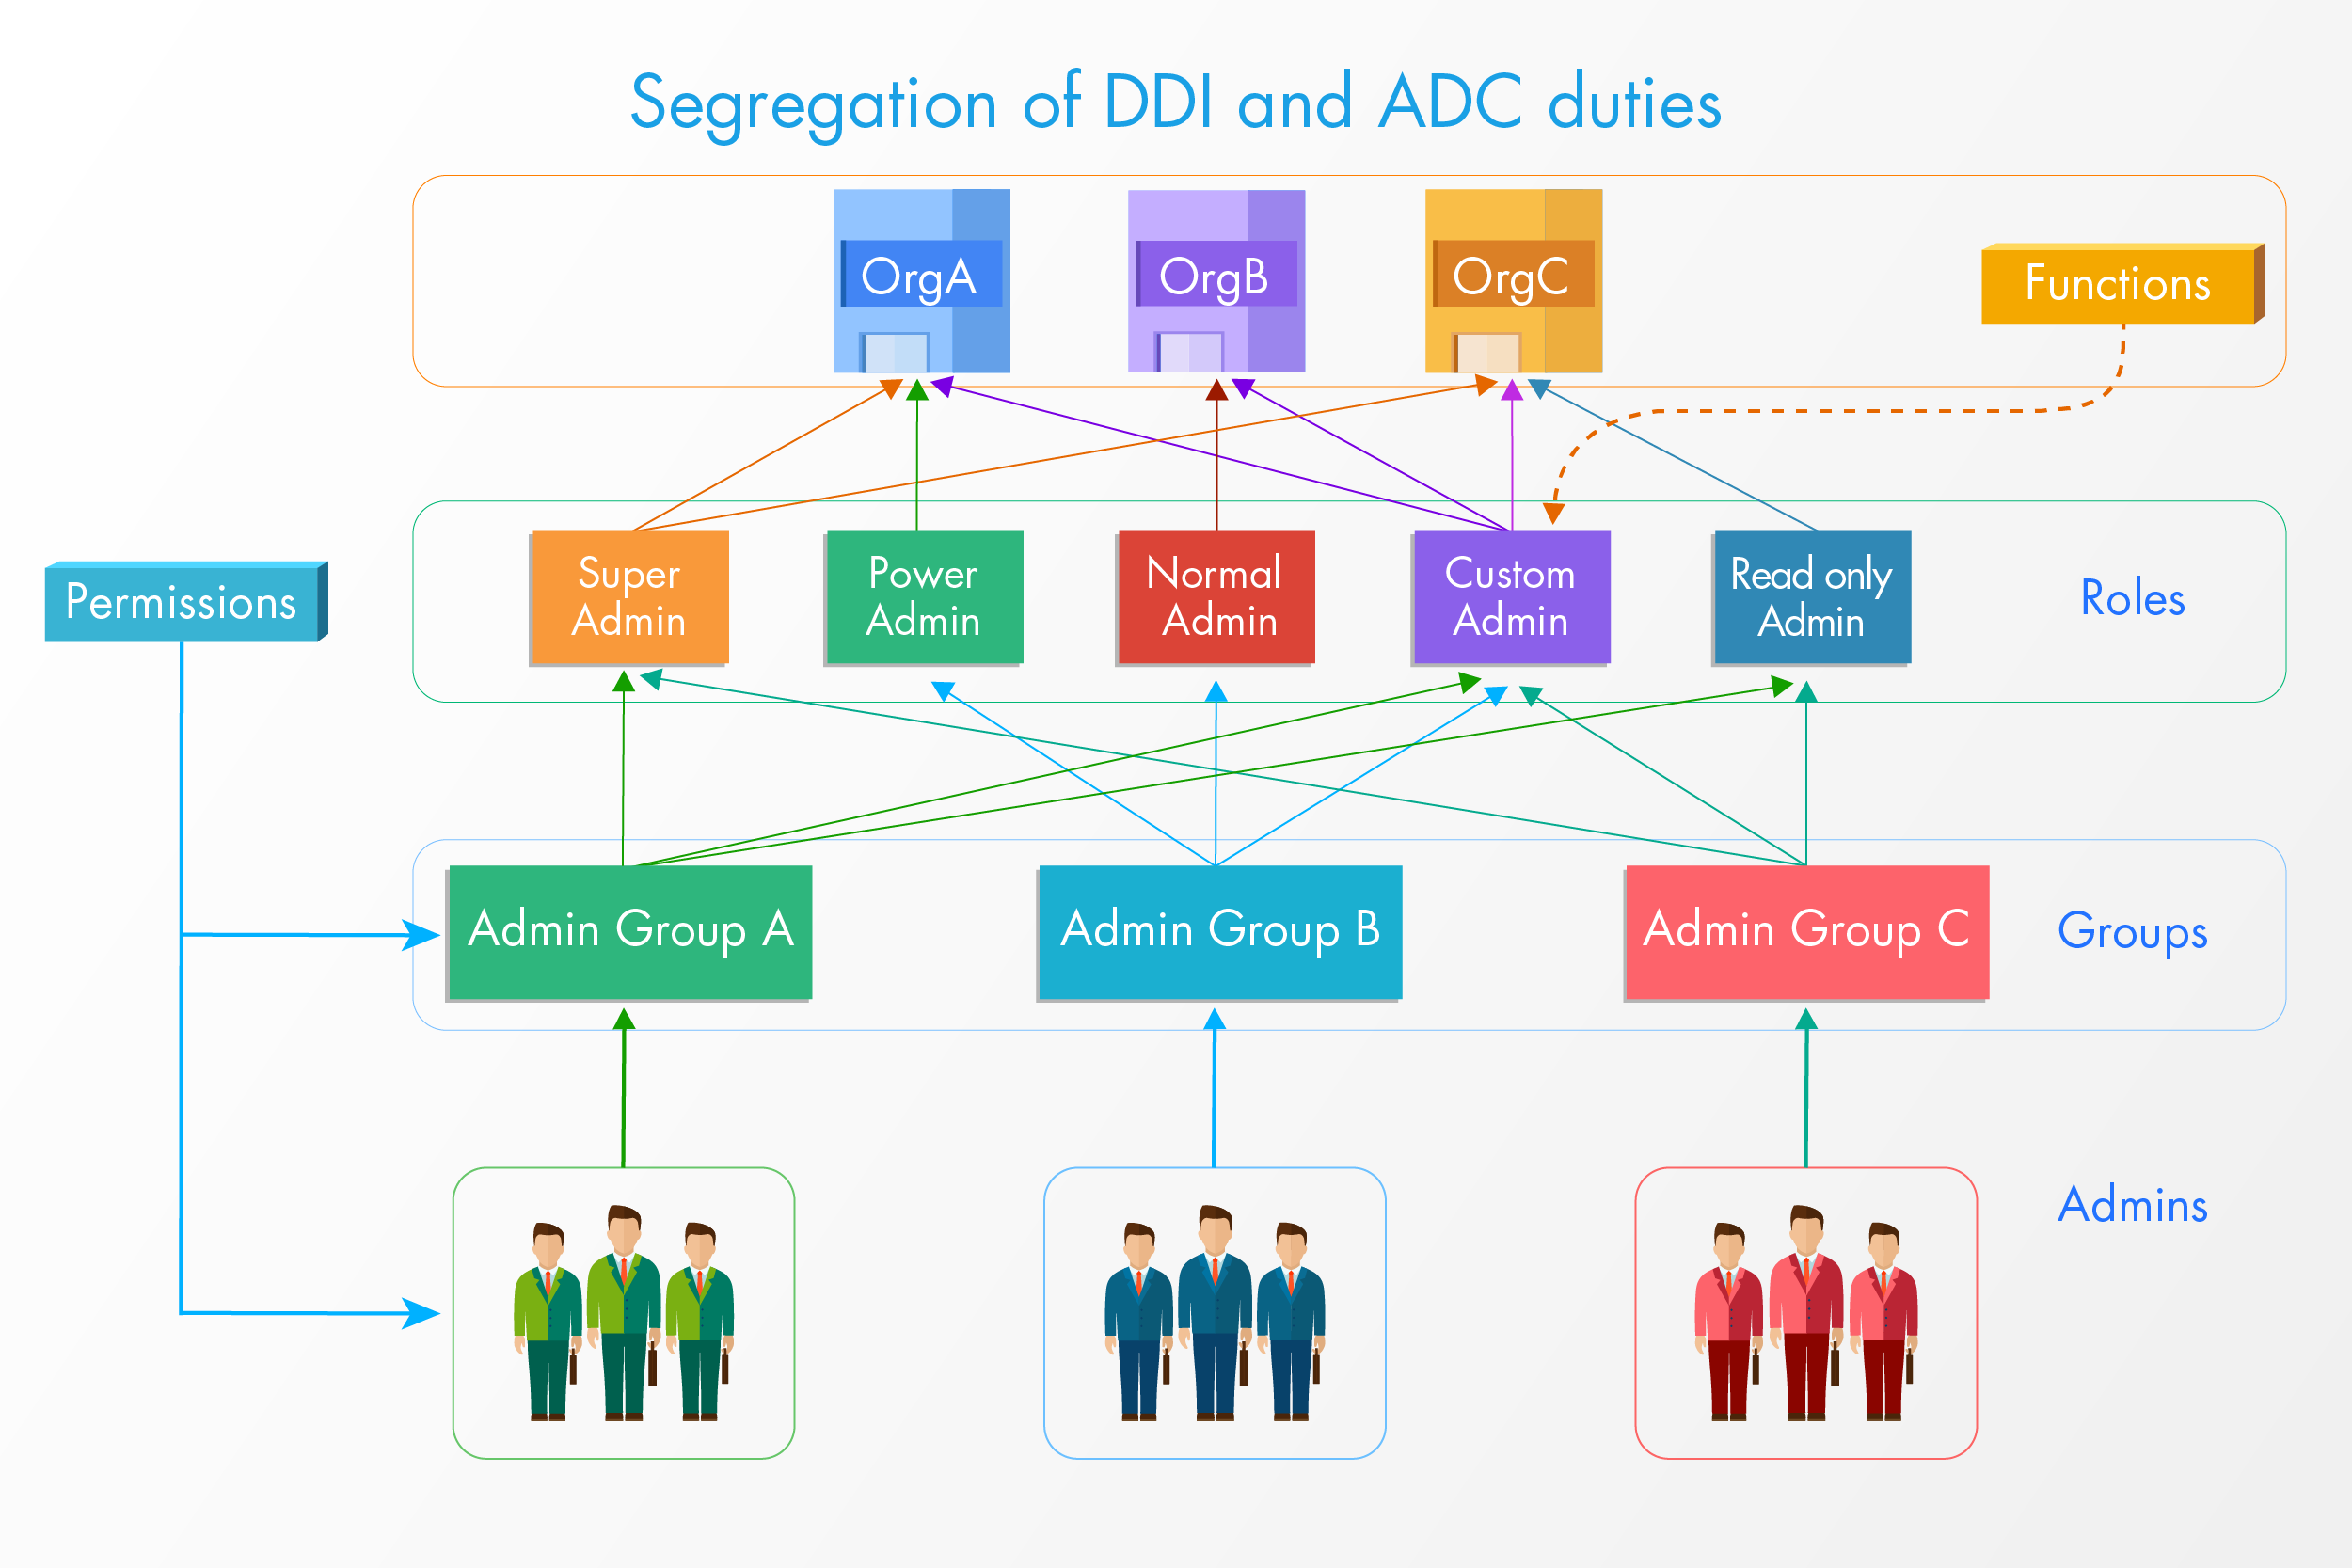 Segregation Of DDI and ADC Duties